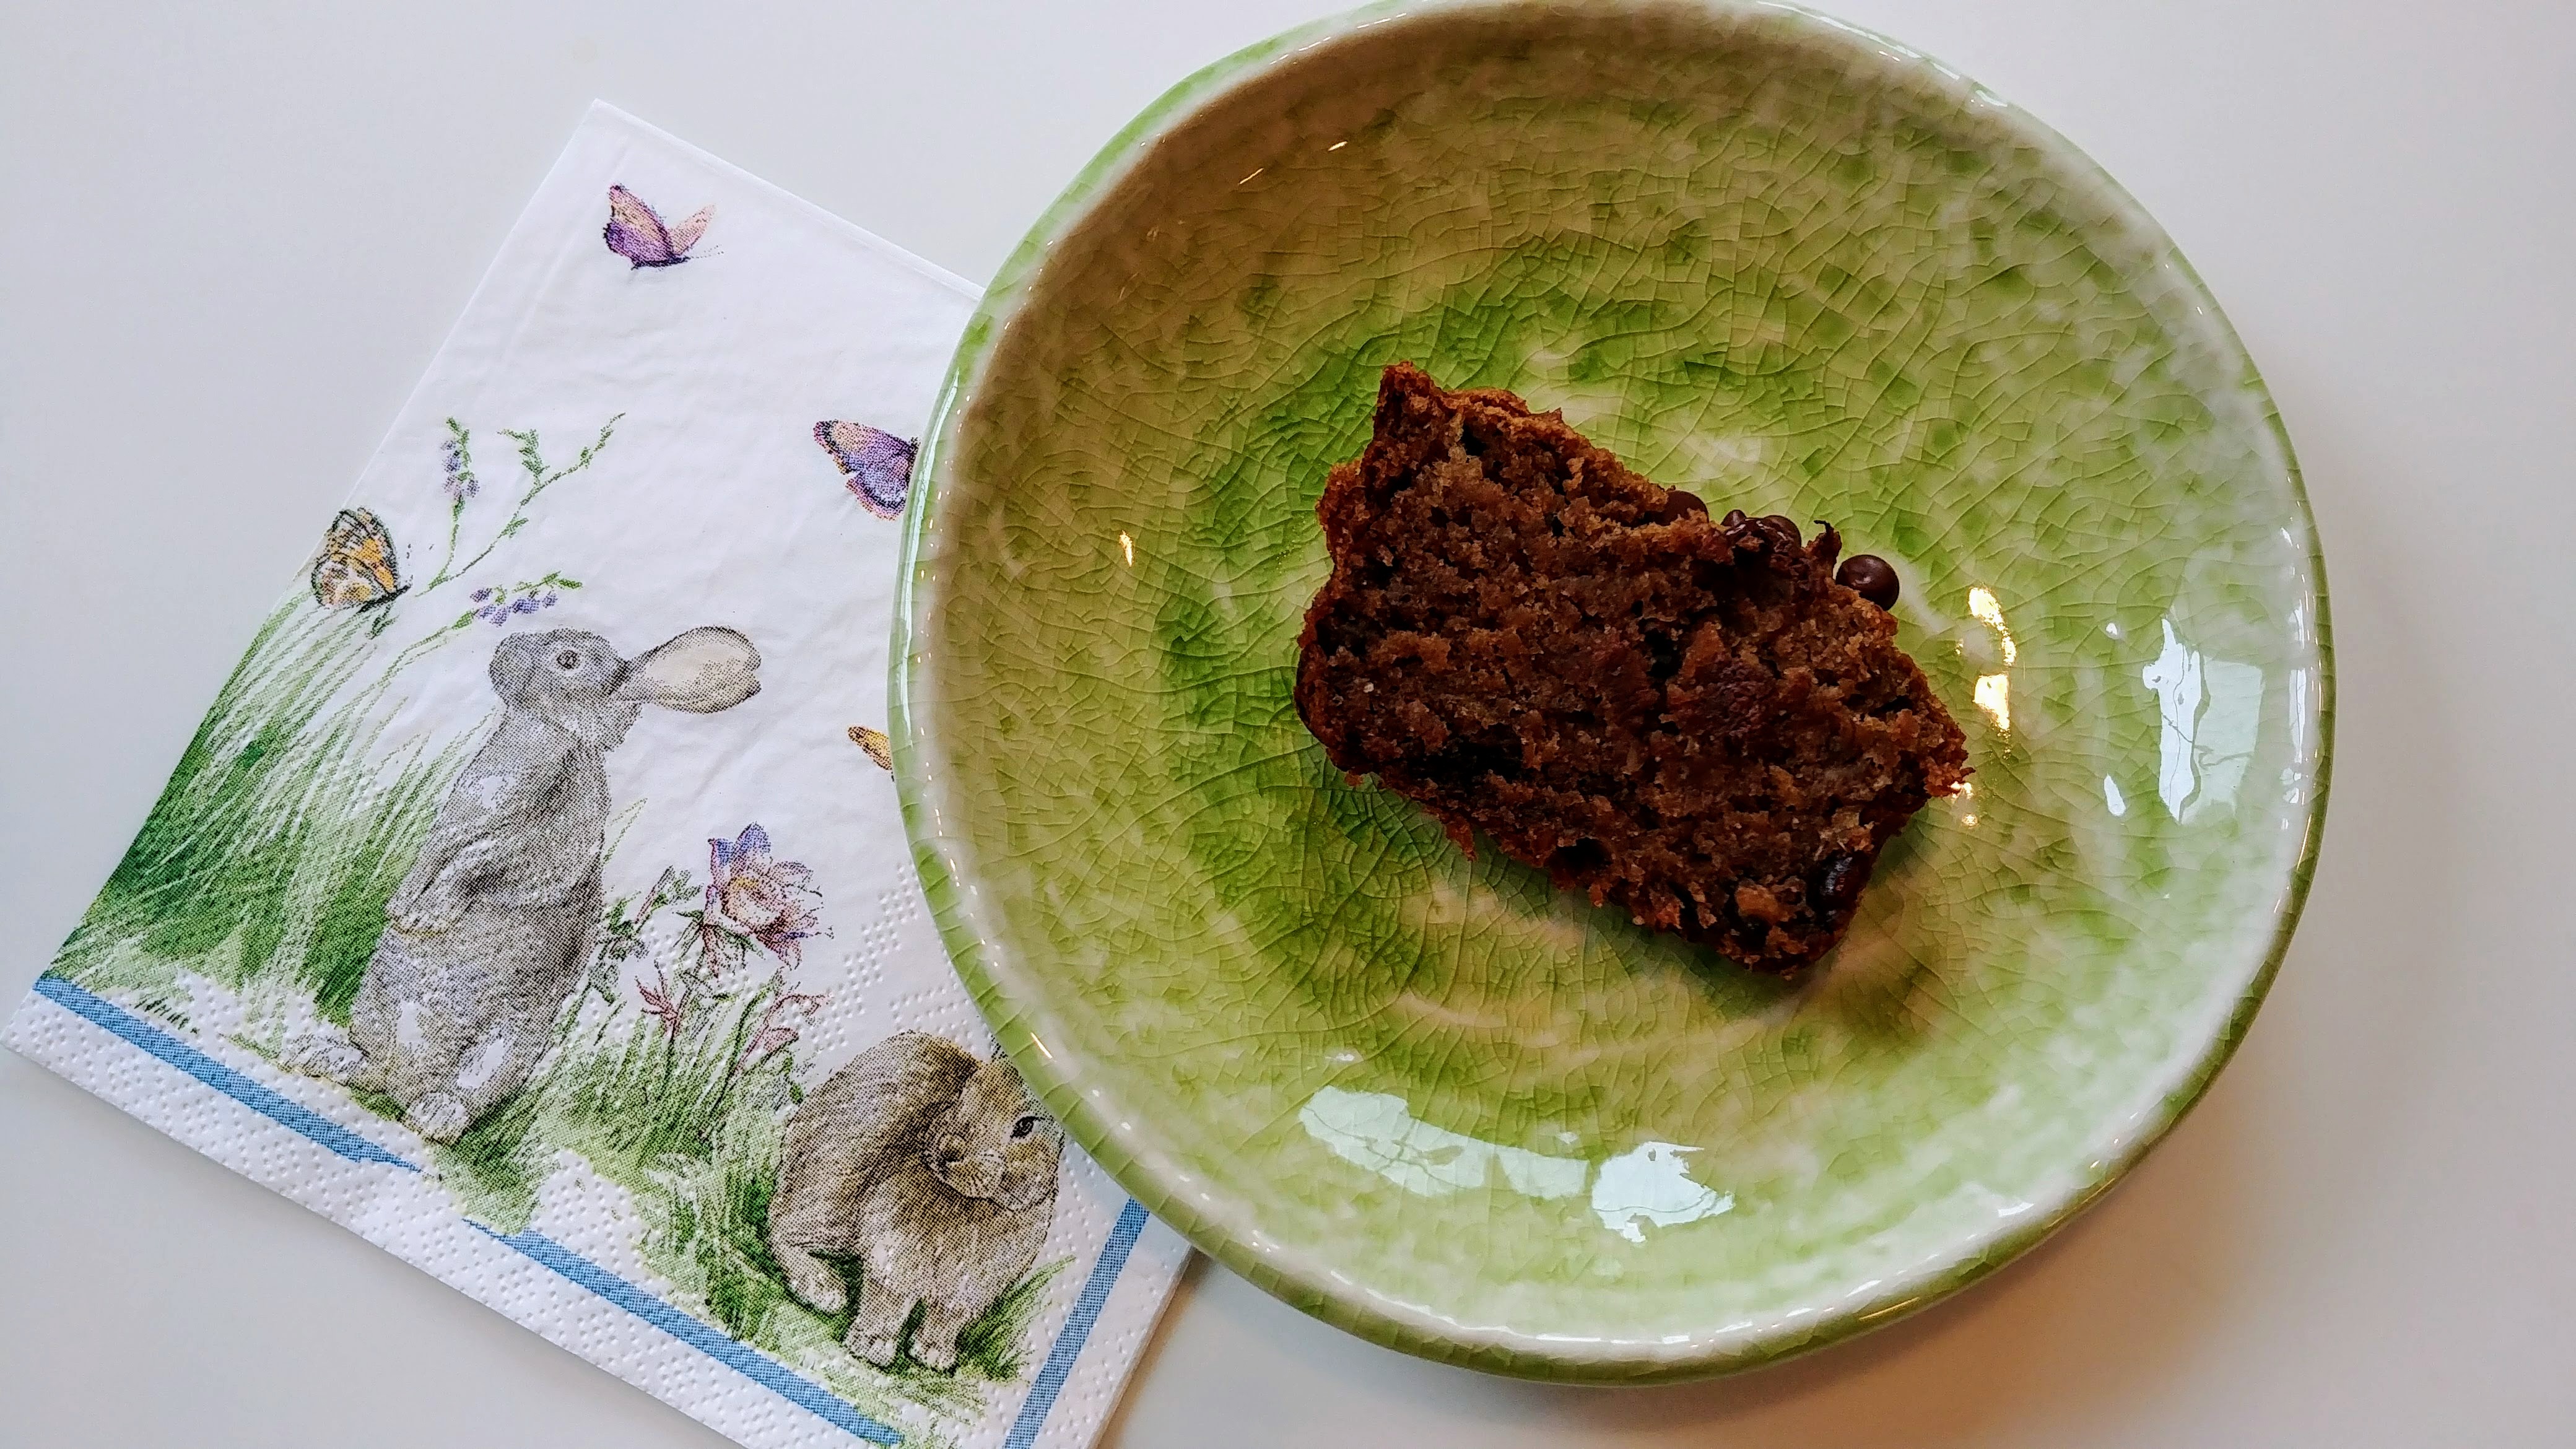 slice of bread on plate with bunny napkin